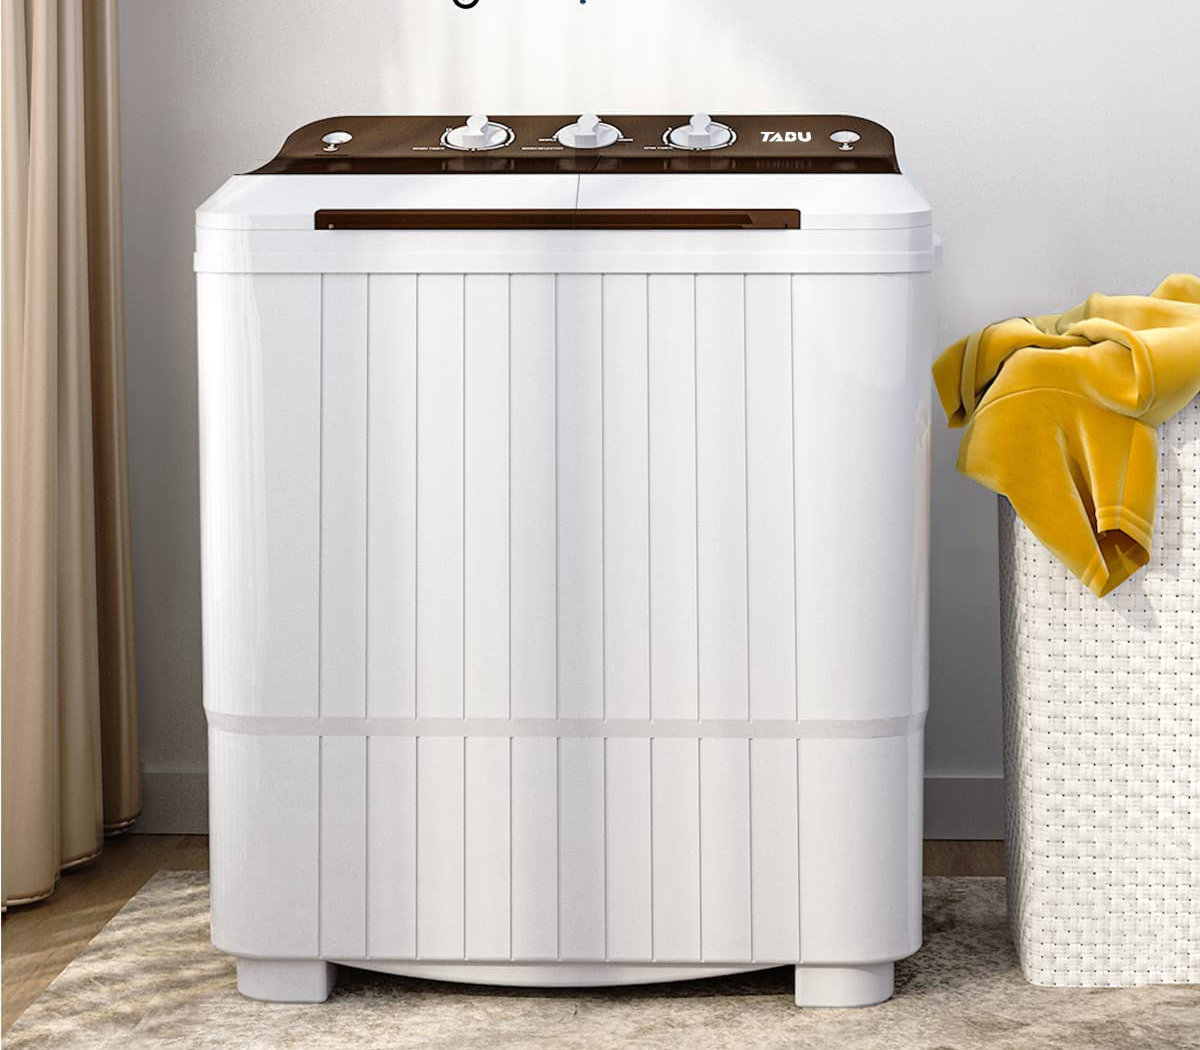 5.5 lbs Portable Semi Auto Washing Machine for Small Space - Costway